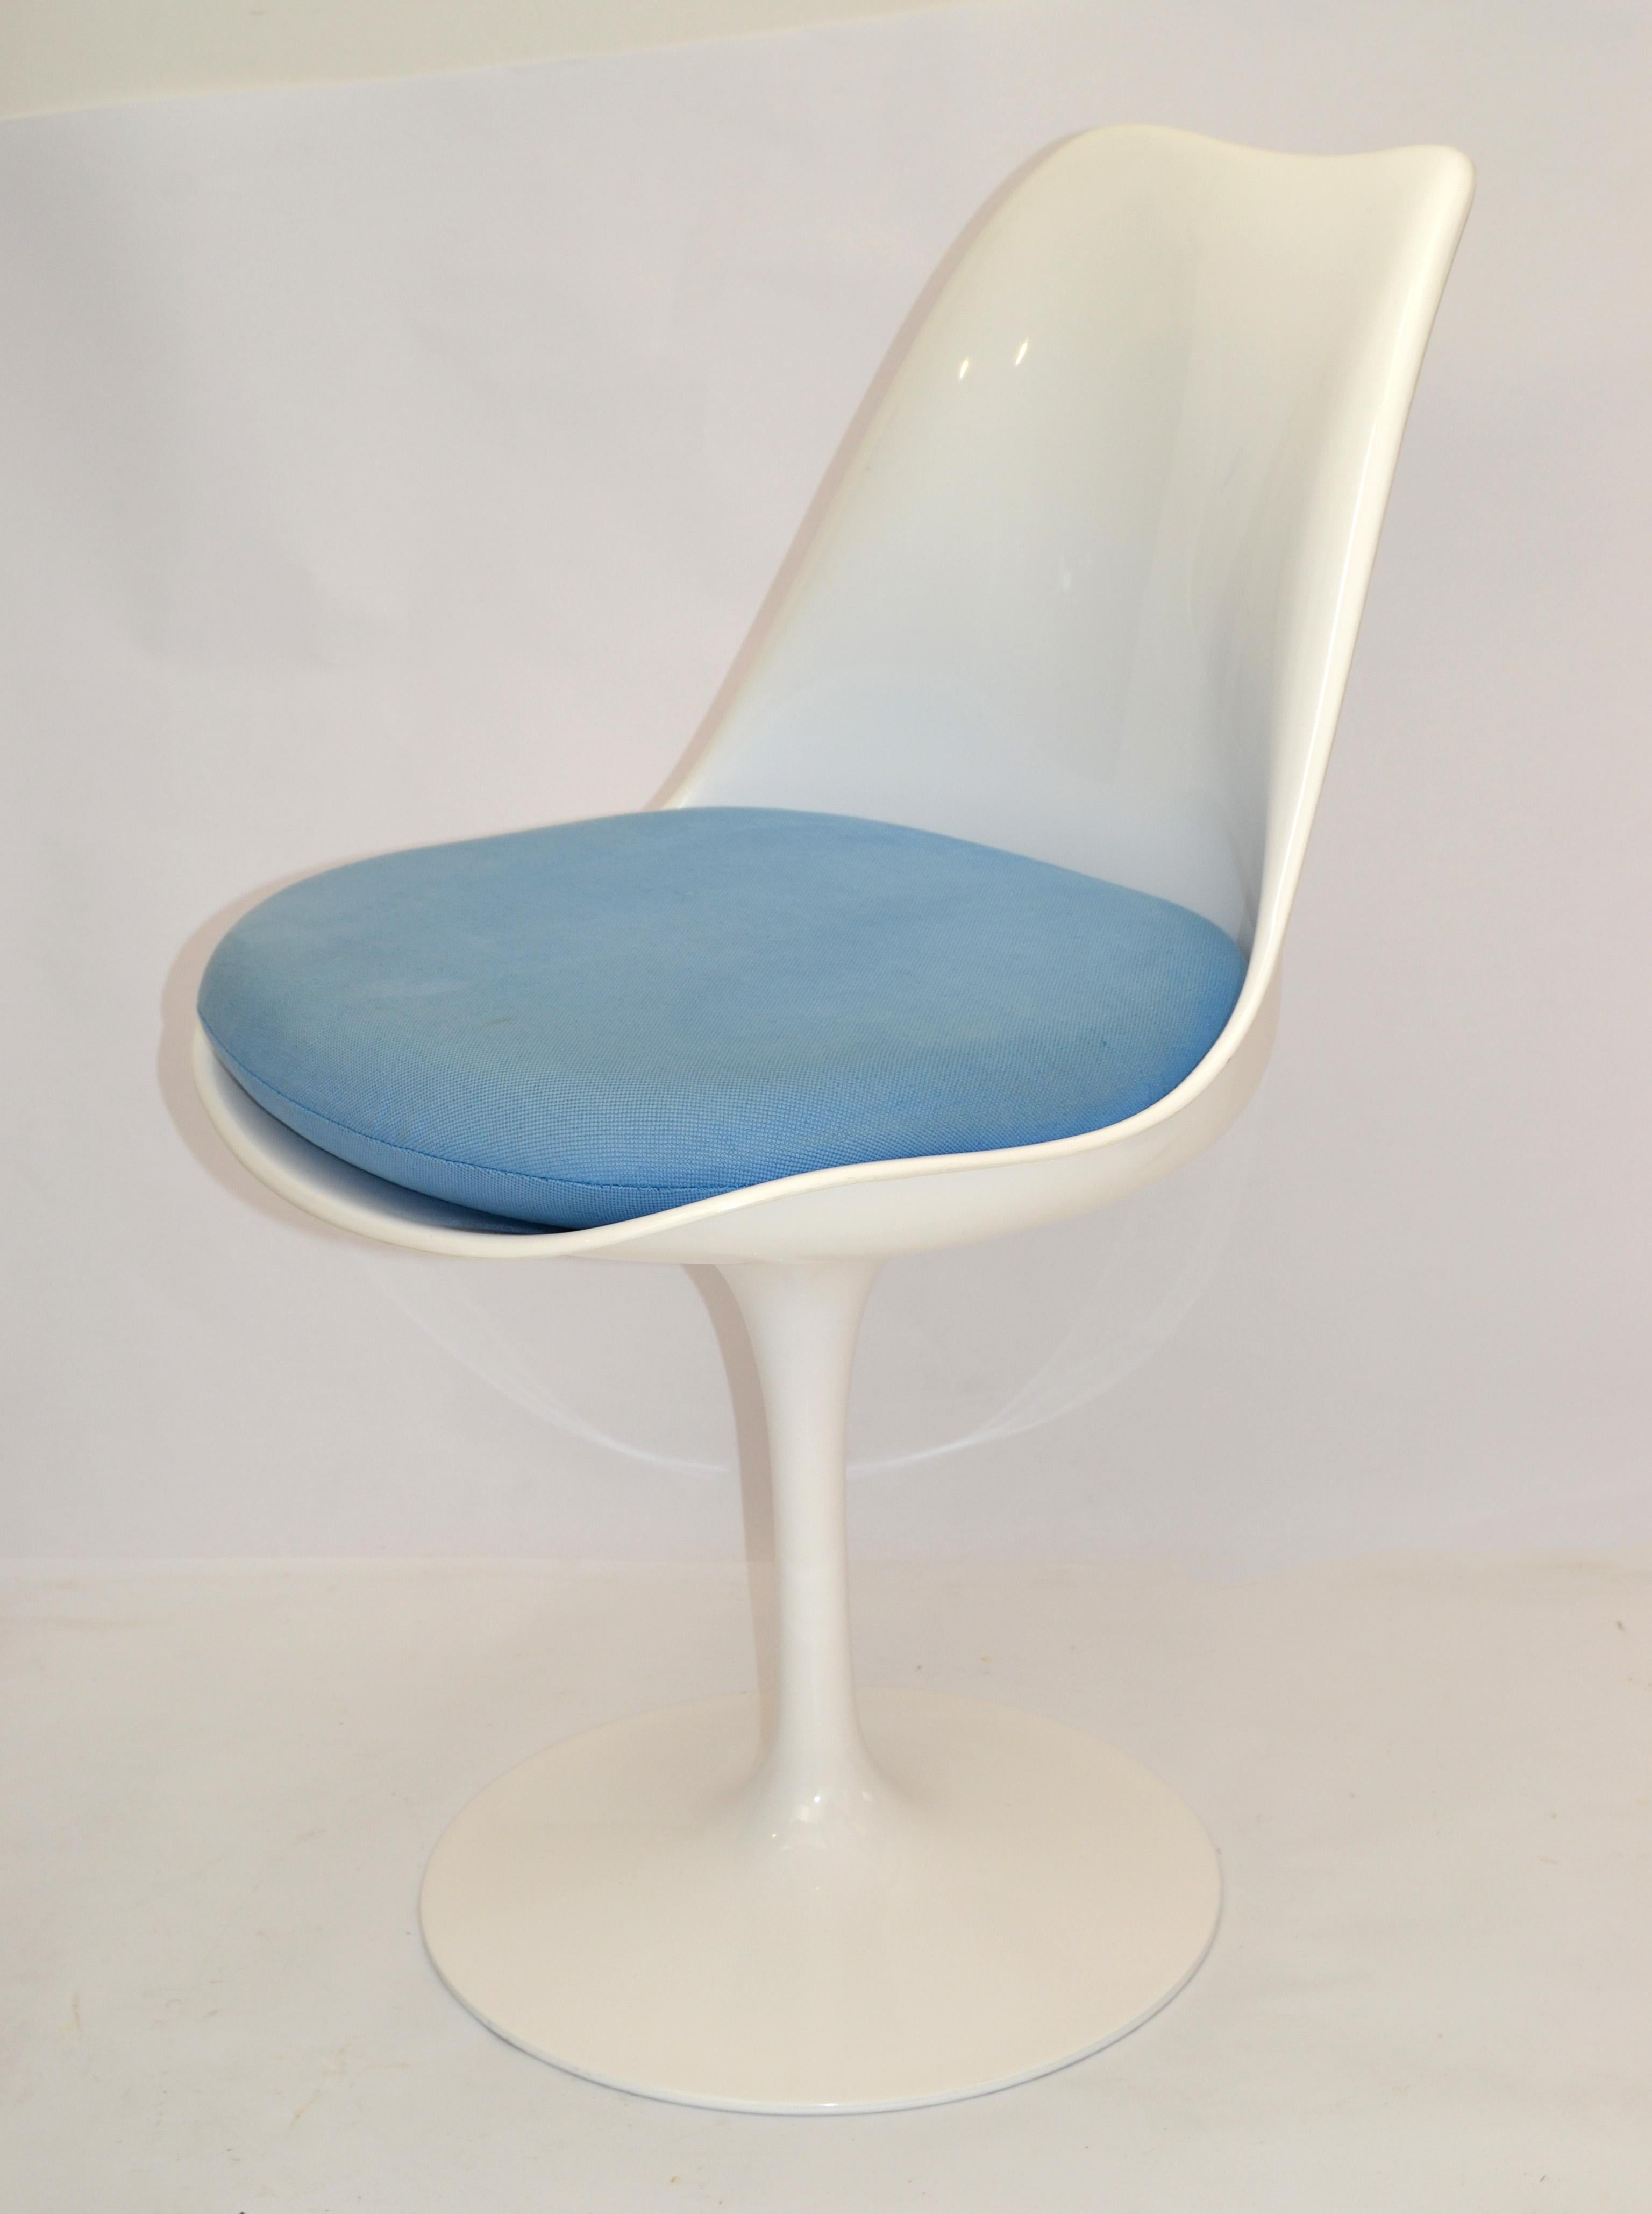 Modern Tulip Swivel Chair in the Style of Knoll Attributed to Eero Saarinen White Blue